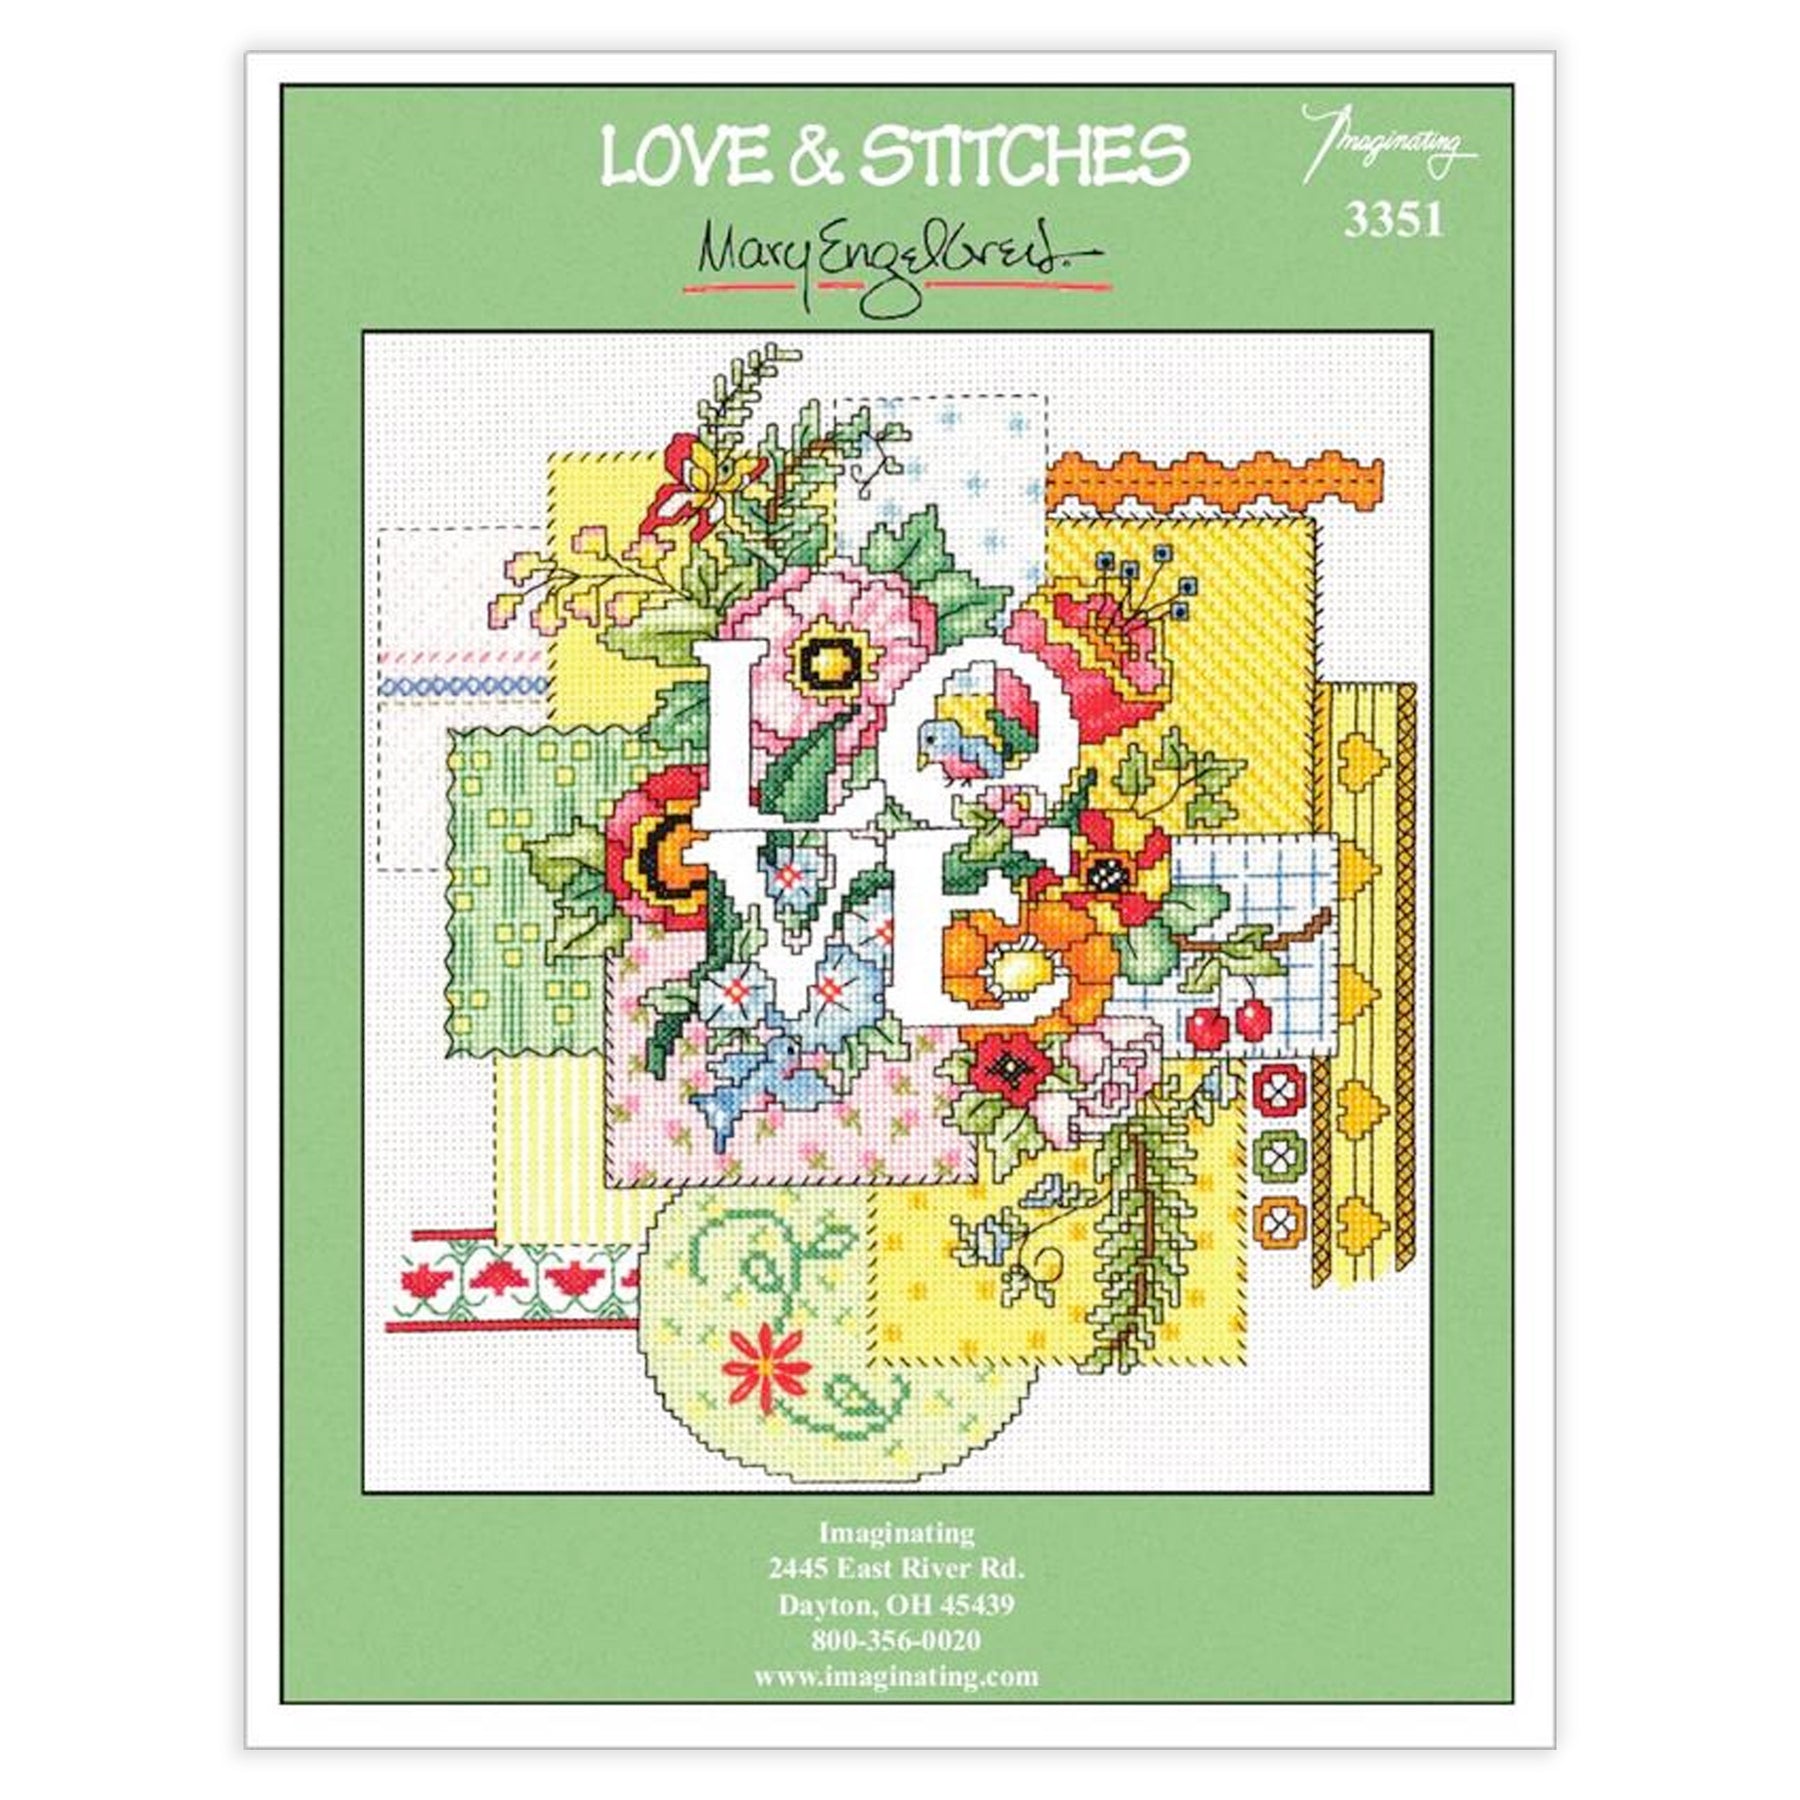 Love and Stitches Counted Cross Stitch Kit